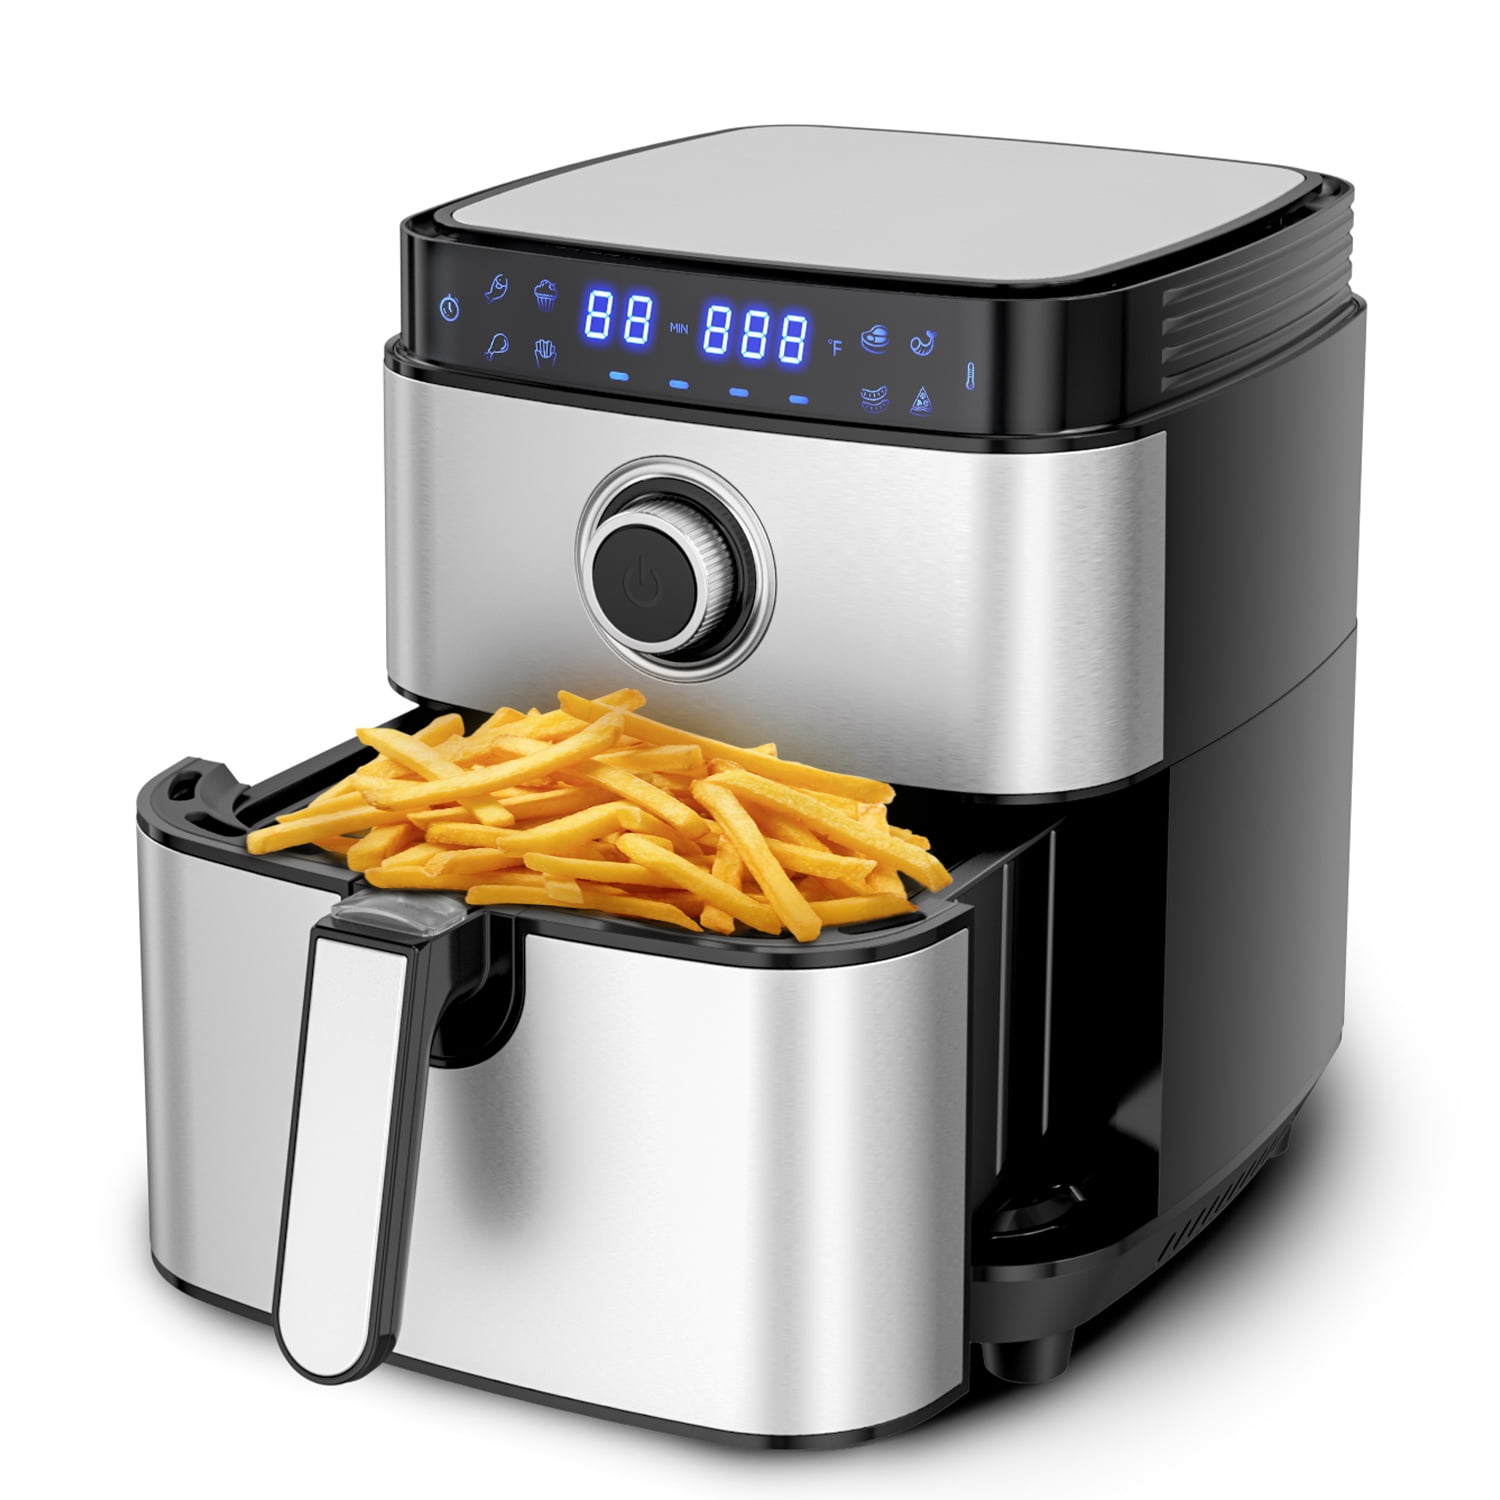 Moosoo MA90 Air Fryer Oven - Roller Auctions